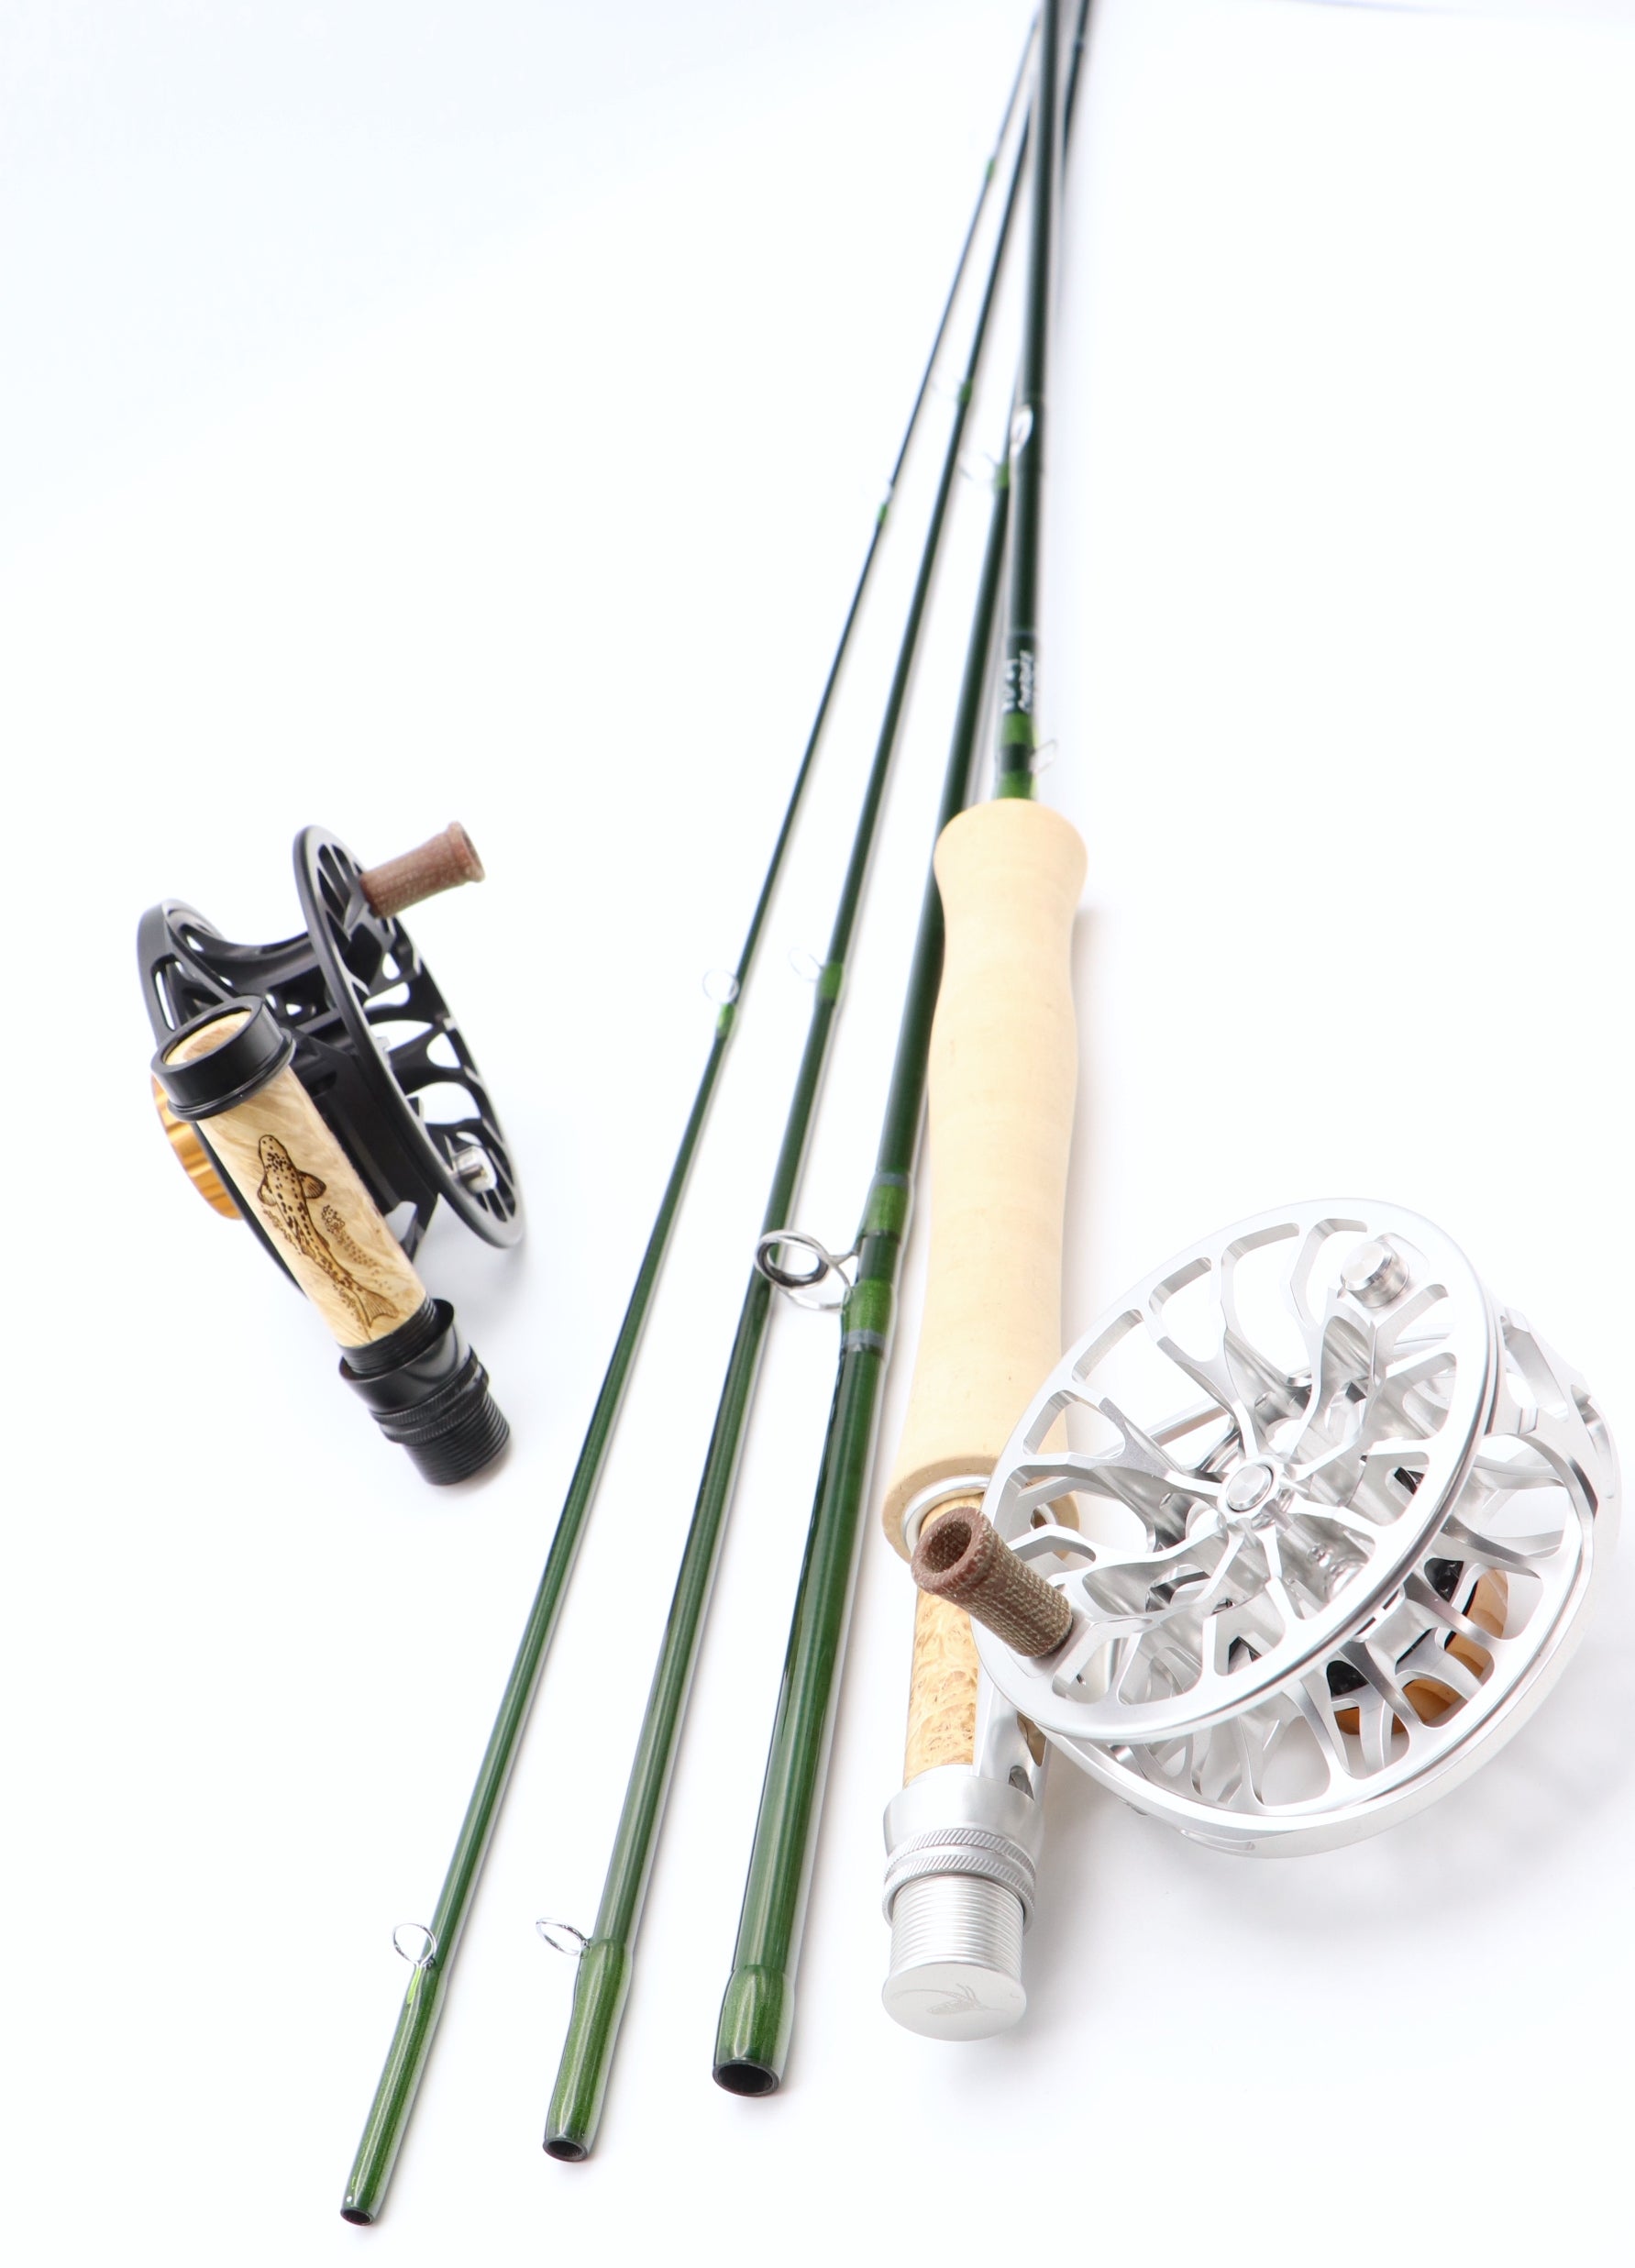 Coherence Fly Rod 4,5,6, model for freshwater, 4 piece Medium Fast – JP  Ross Fly Rods & Co. Outdoors